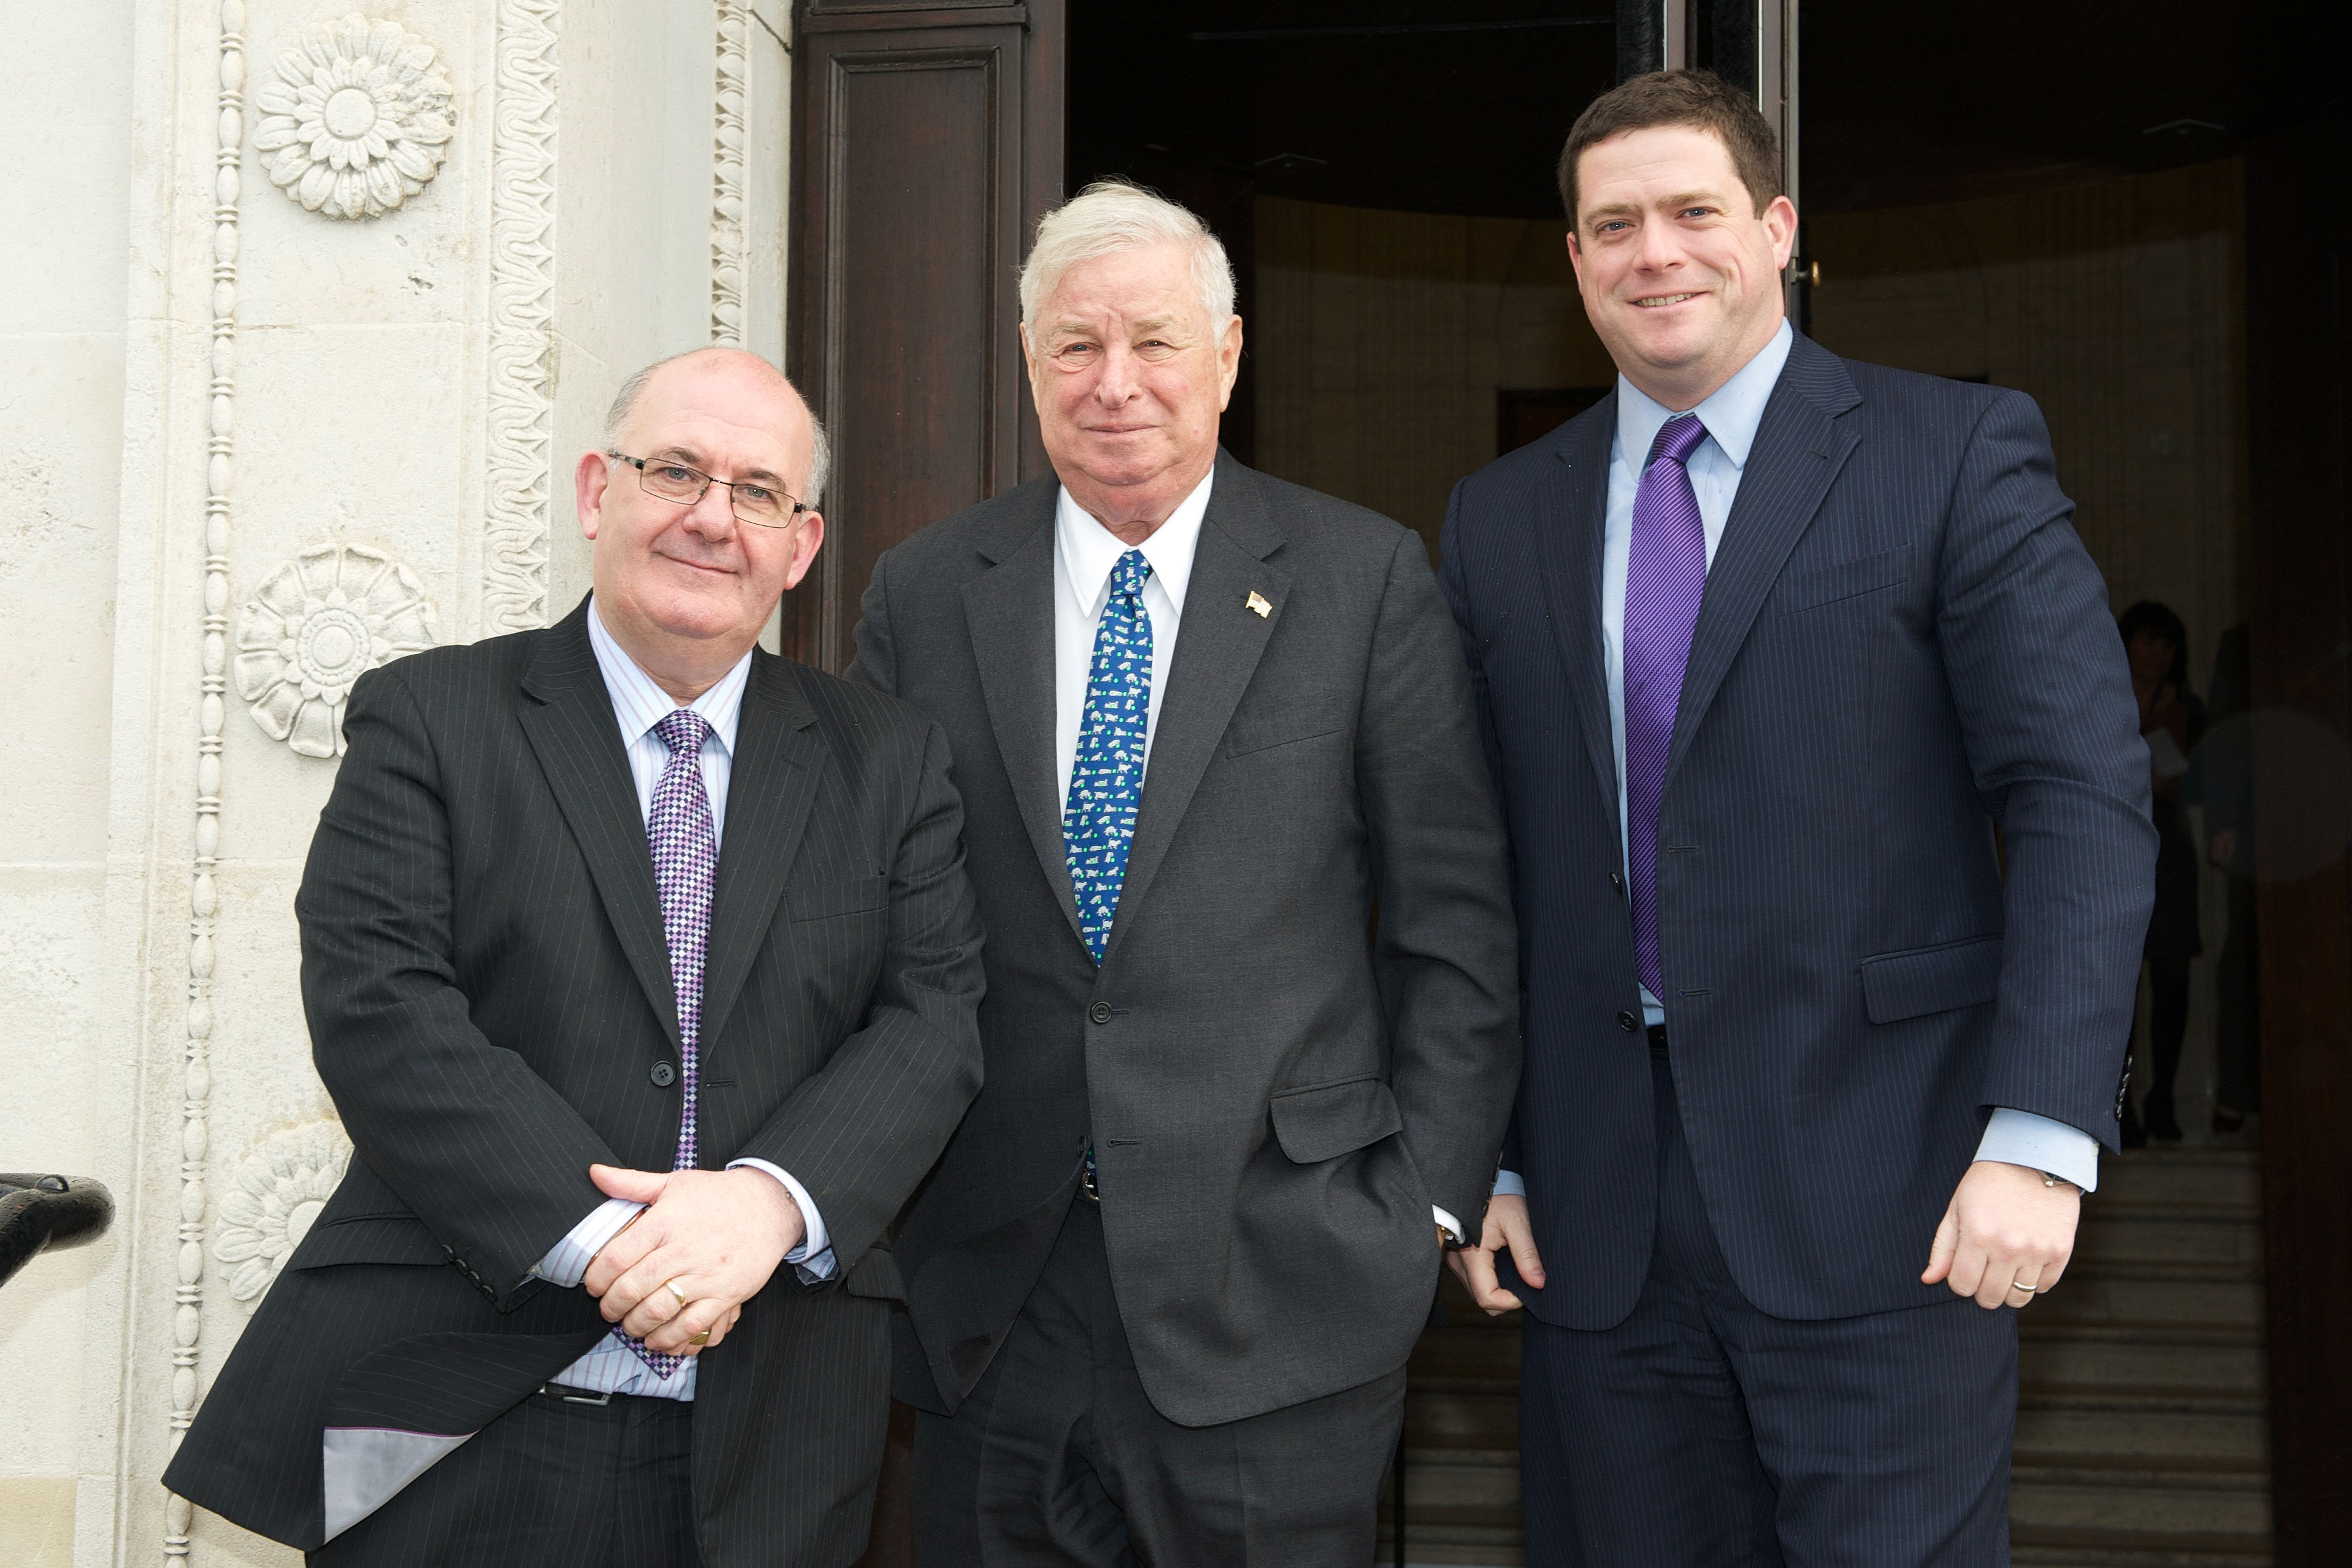 US Ambassador Louis Susman and US Consul Kevin Roland being welcomed to Parliament Buildings by The Speaker William Hay MLA